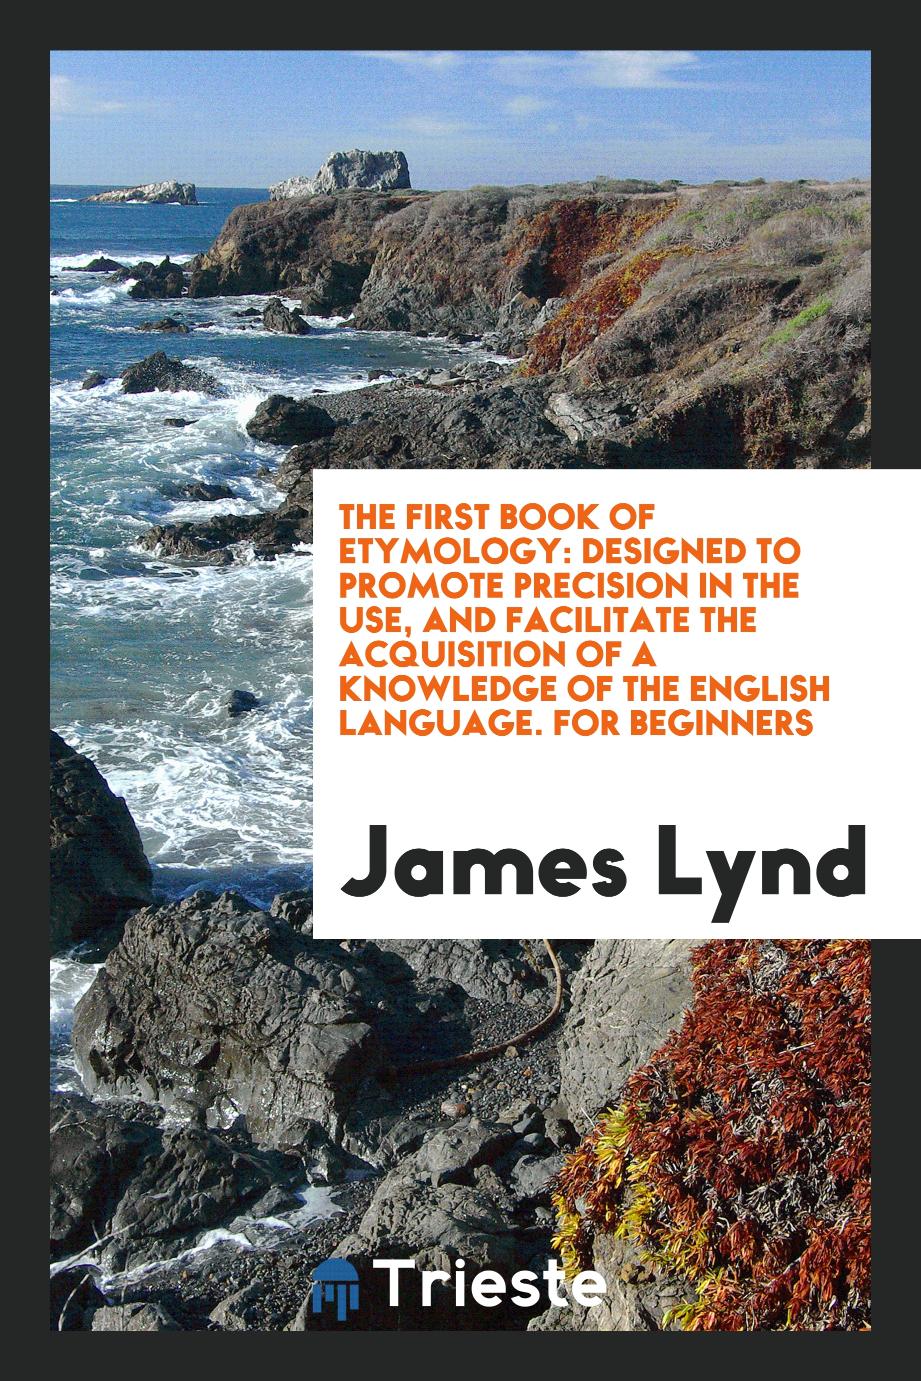 The First Book of Etymology: Designed to Promote Precision in the Use, and Facilitate the Acquisition of a Knowledge of the English Language. For Beginners